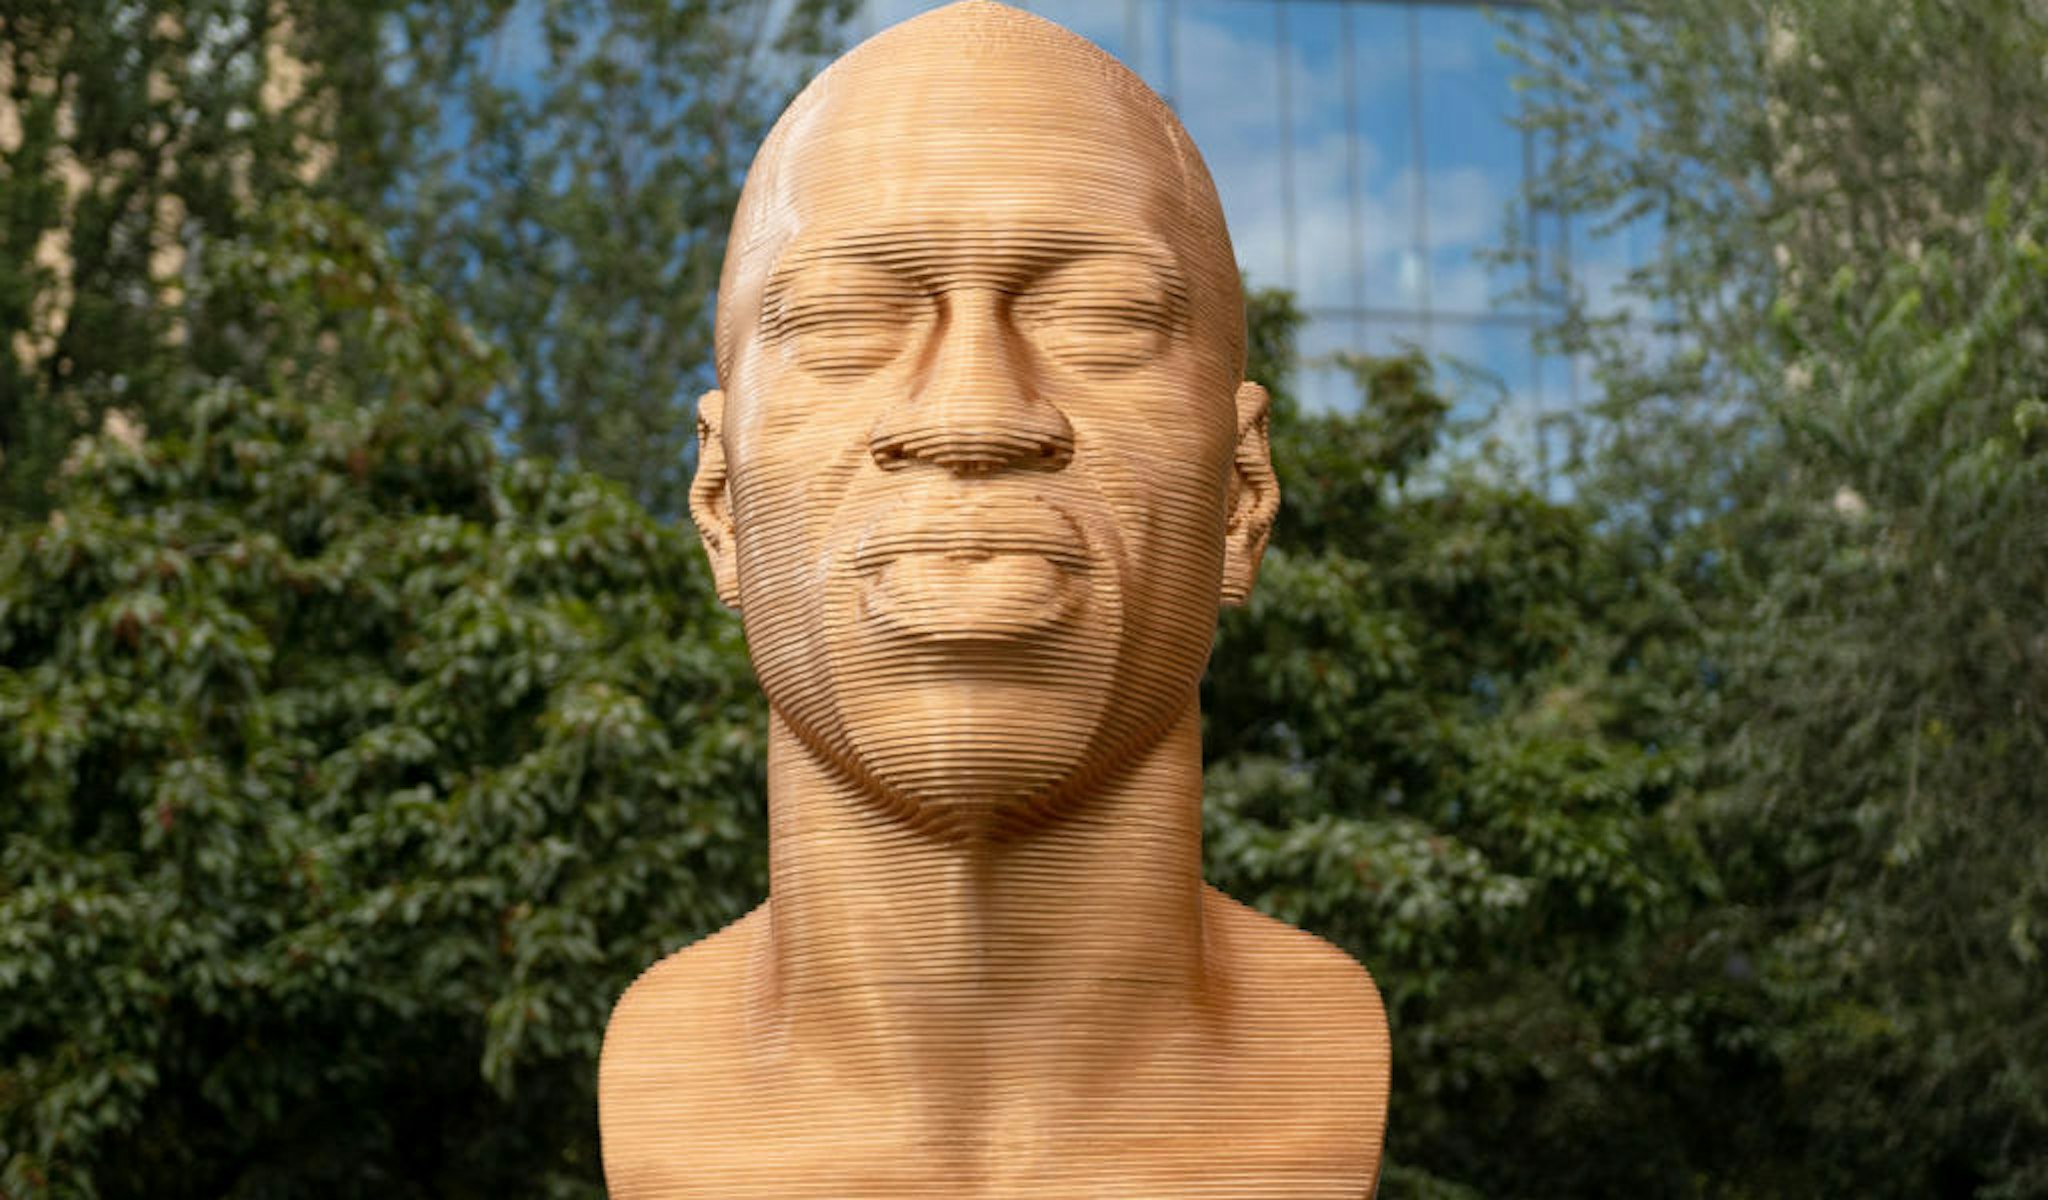 NEW YORK, NEW YORK - SEPTEMBER 30: A close up of the “FLOYD" sculpture during Confront Art’s First Exhibition SEEINJUSTICE in Union Square on September 30, 2021 in New York City. SEEINJUSATICE contains three statues by artist Chris Carnabuci, “FLOYD”, “BREONNA TAYLOR”, and “JOHN LEWIS.” The art officially opens to the public on October 1st and was organized in collaboration with NYC Parks and the Union Square Partnership. (Photo by Alexi Rosenfeld/Getty Images)